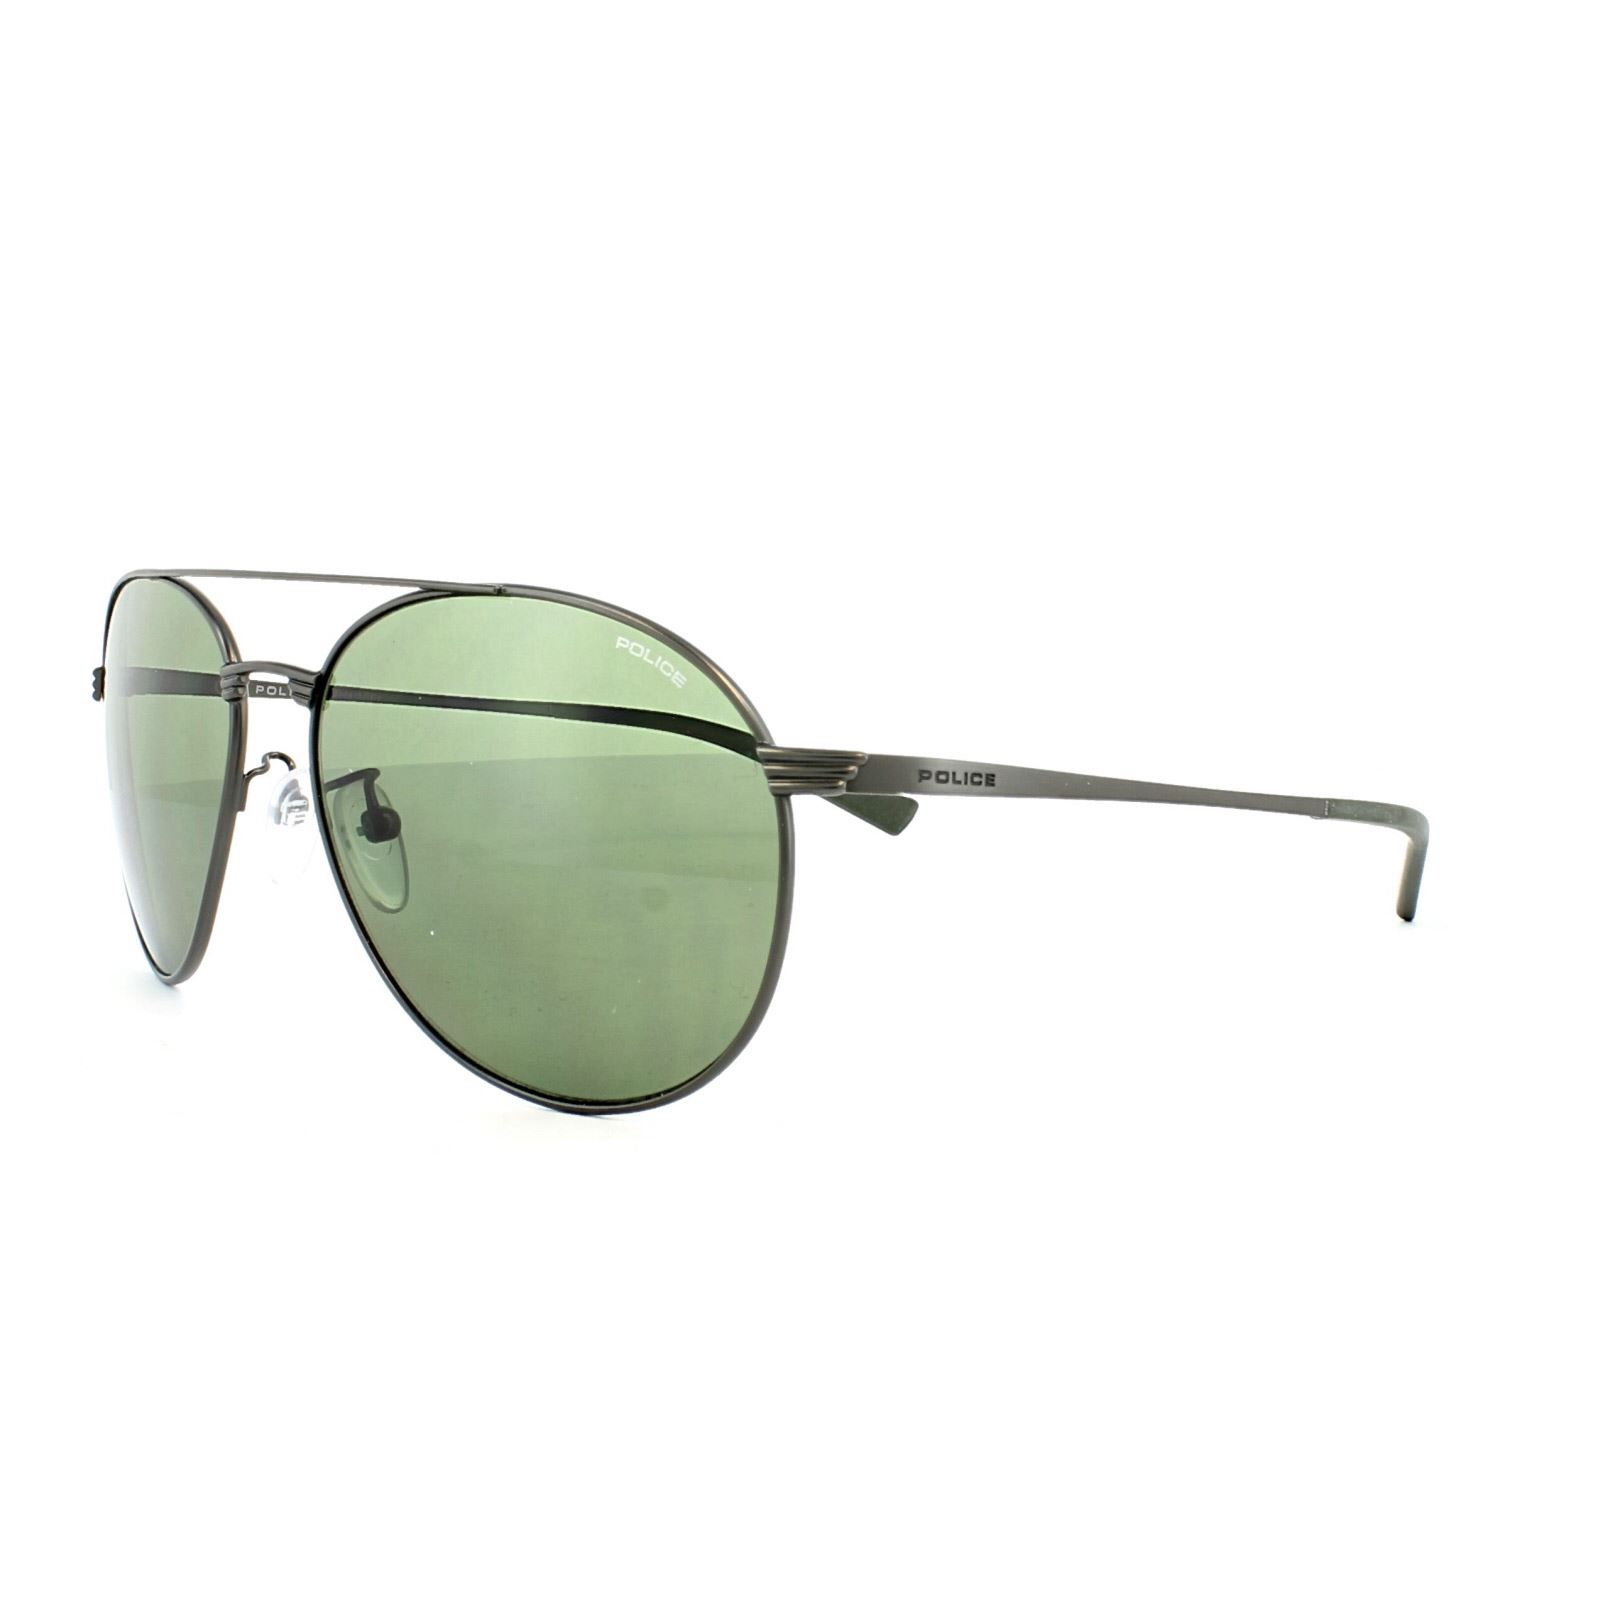 Police Sunglasses S8953 Rival 2 0627 Gunmetal Green are a slimmed down aviator style with a really round aviator lens from Police with cool grooved bride and temple detailing and prominent top brow bar. The frame is really lightweight and the adjustable nose pads will help make it fit and feel as comfortable as possible.